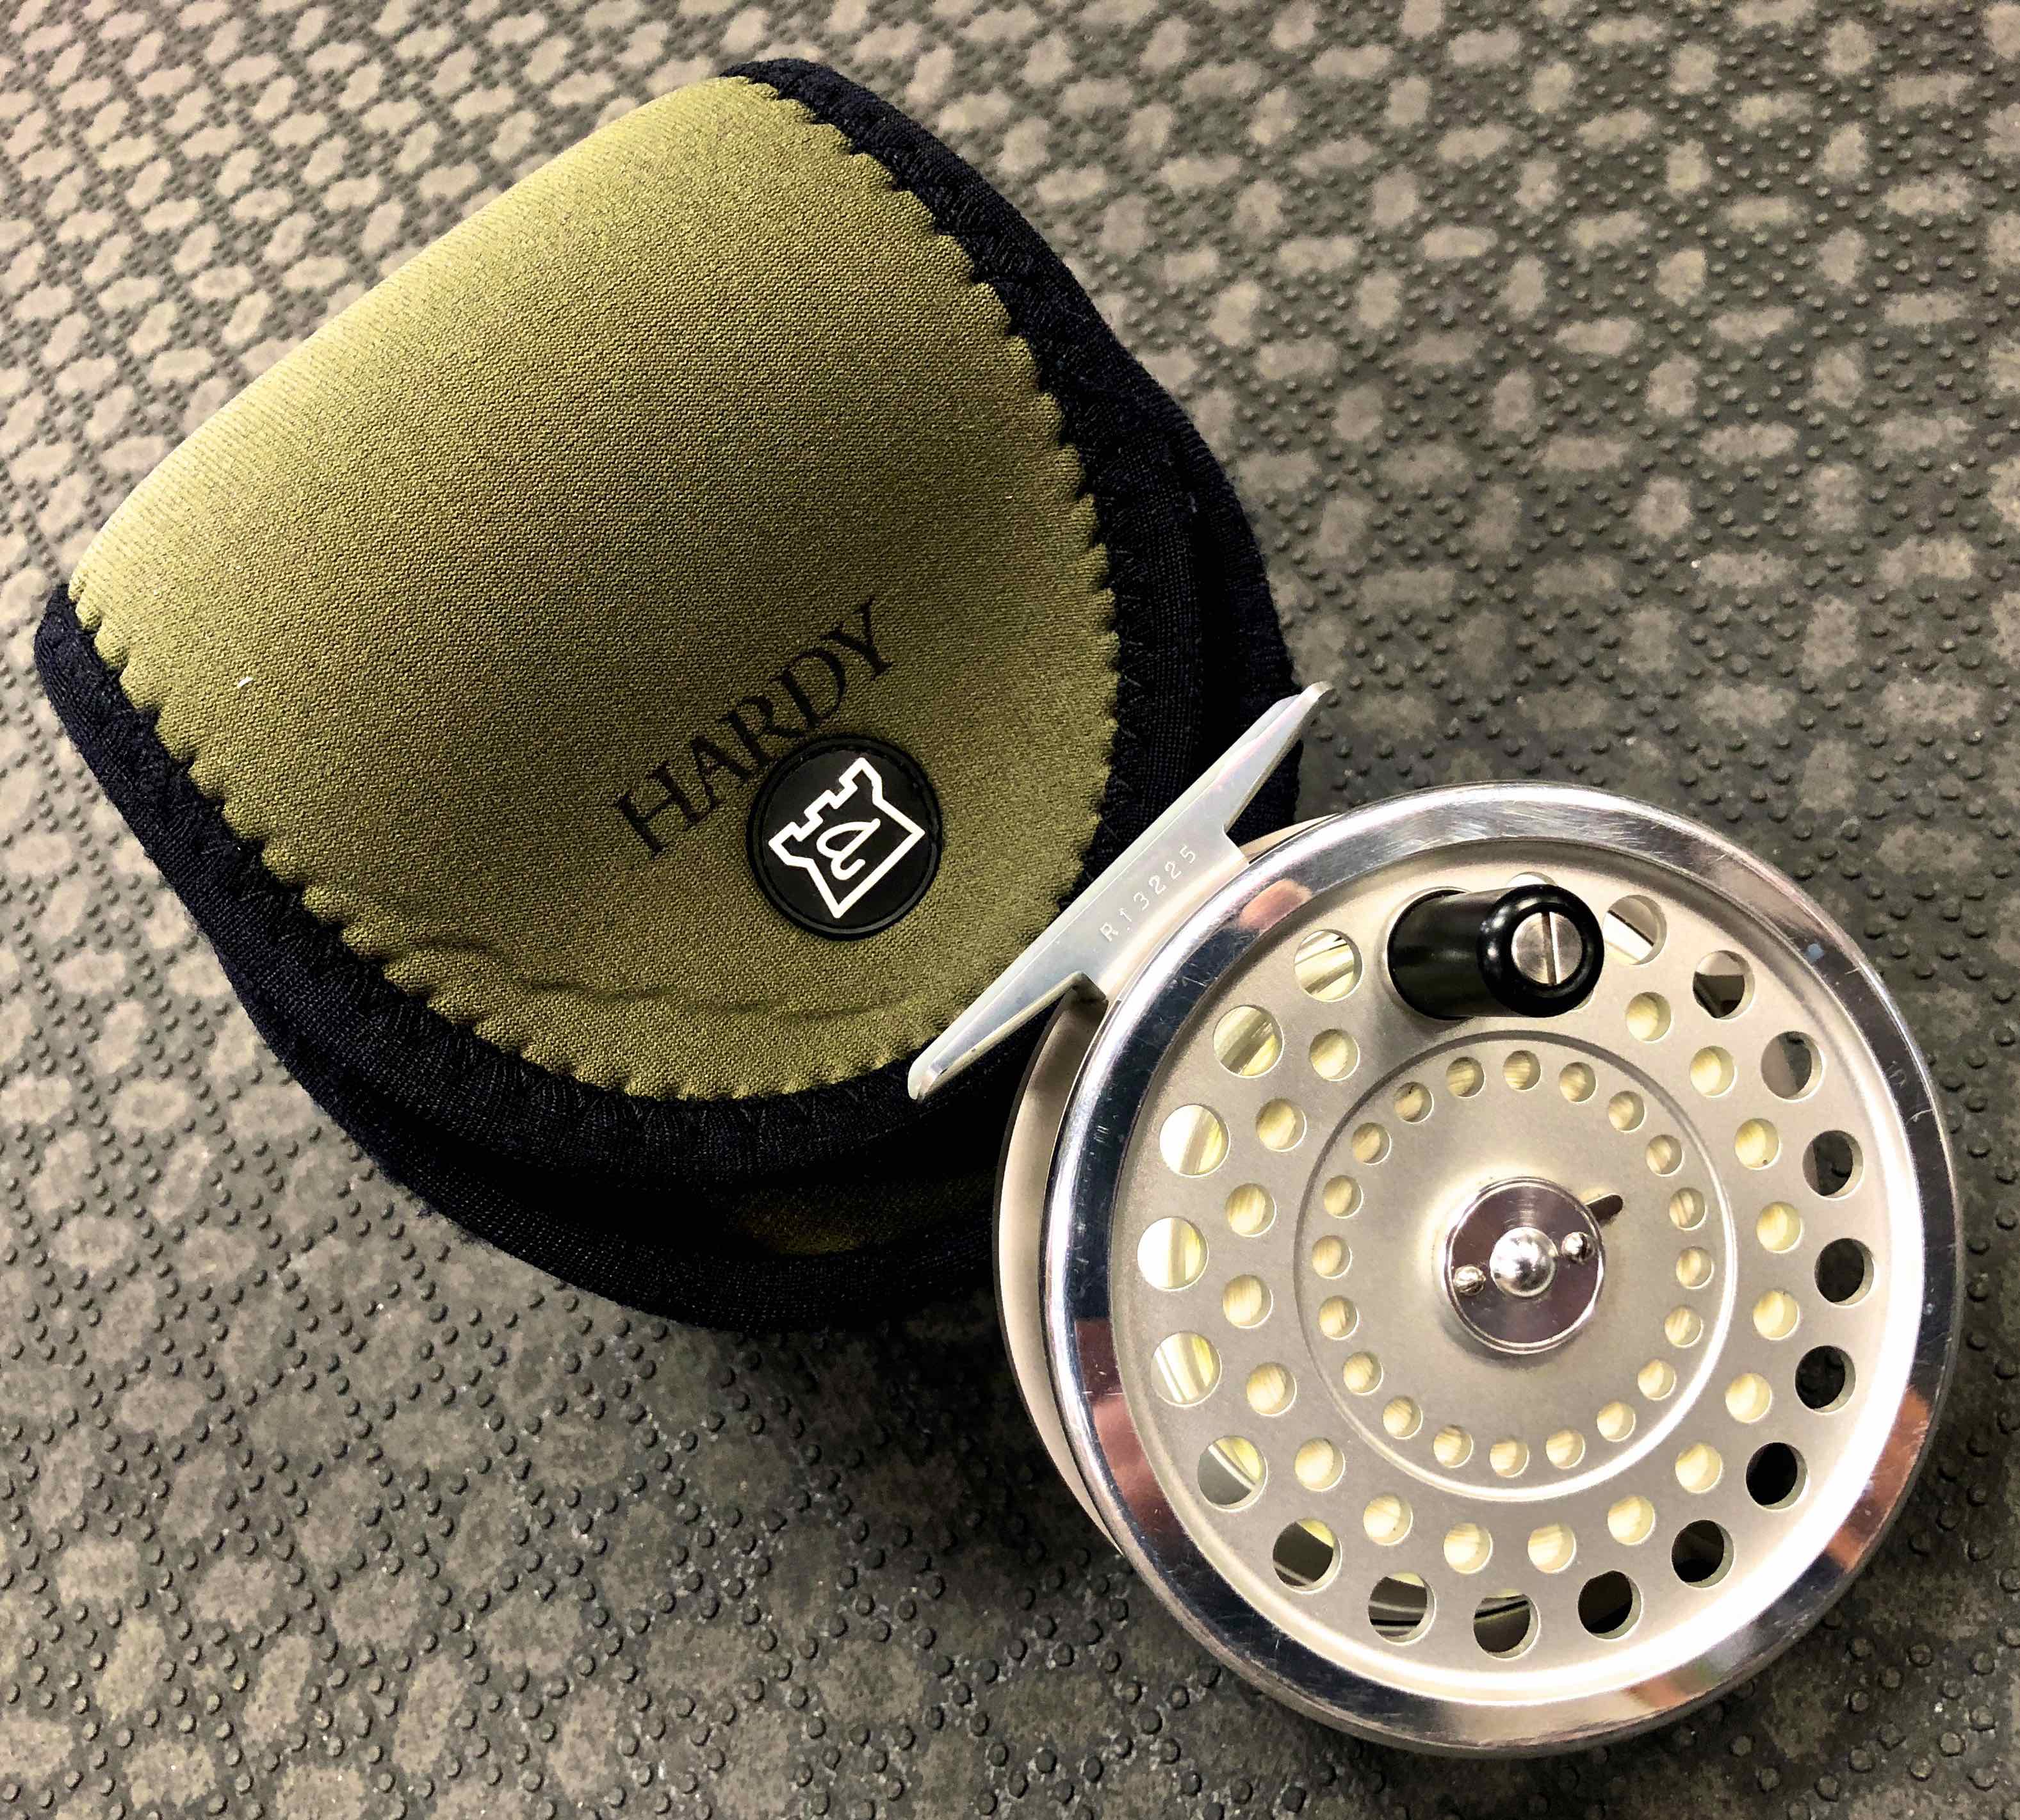 https://thefirstcast.ca/wp-content/uploads/2018/08/Hardy-Marquis-Salmon-No-1-Spey-Switch-Reel-AA.jpg